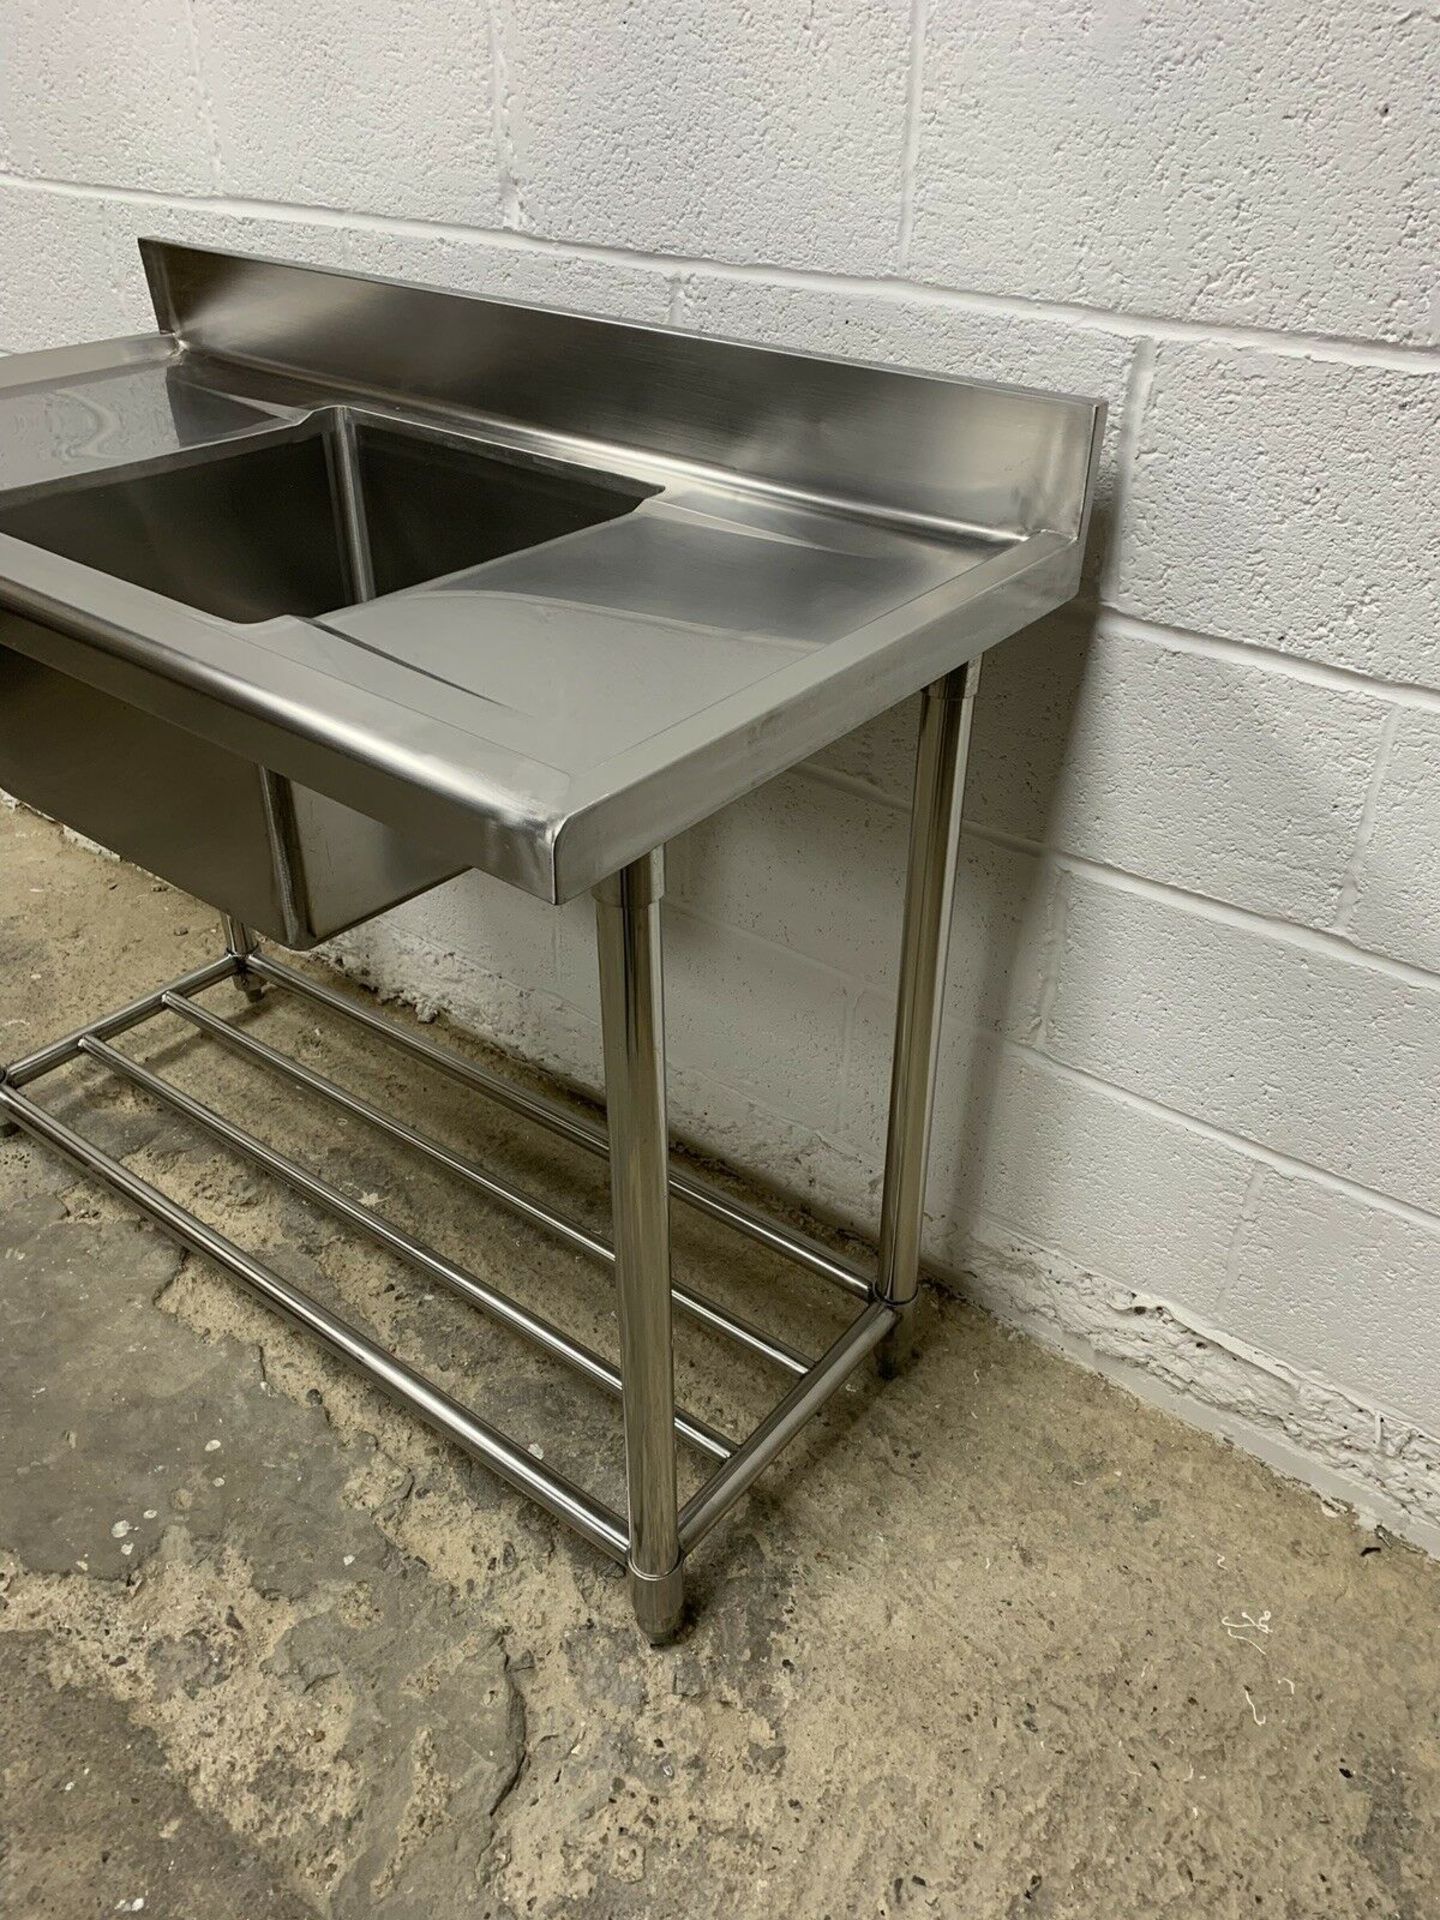 Stainless Steel Commercial Single Bowl Sink With Double Drainer - Image 4 of 6